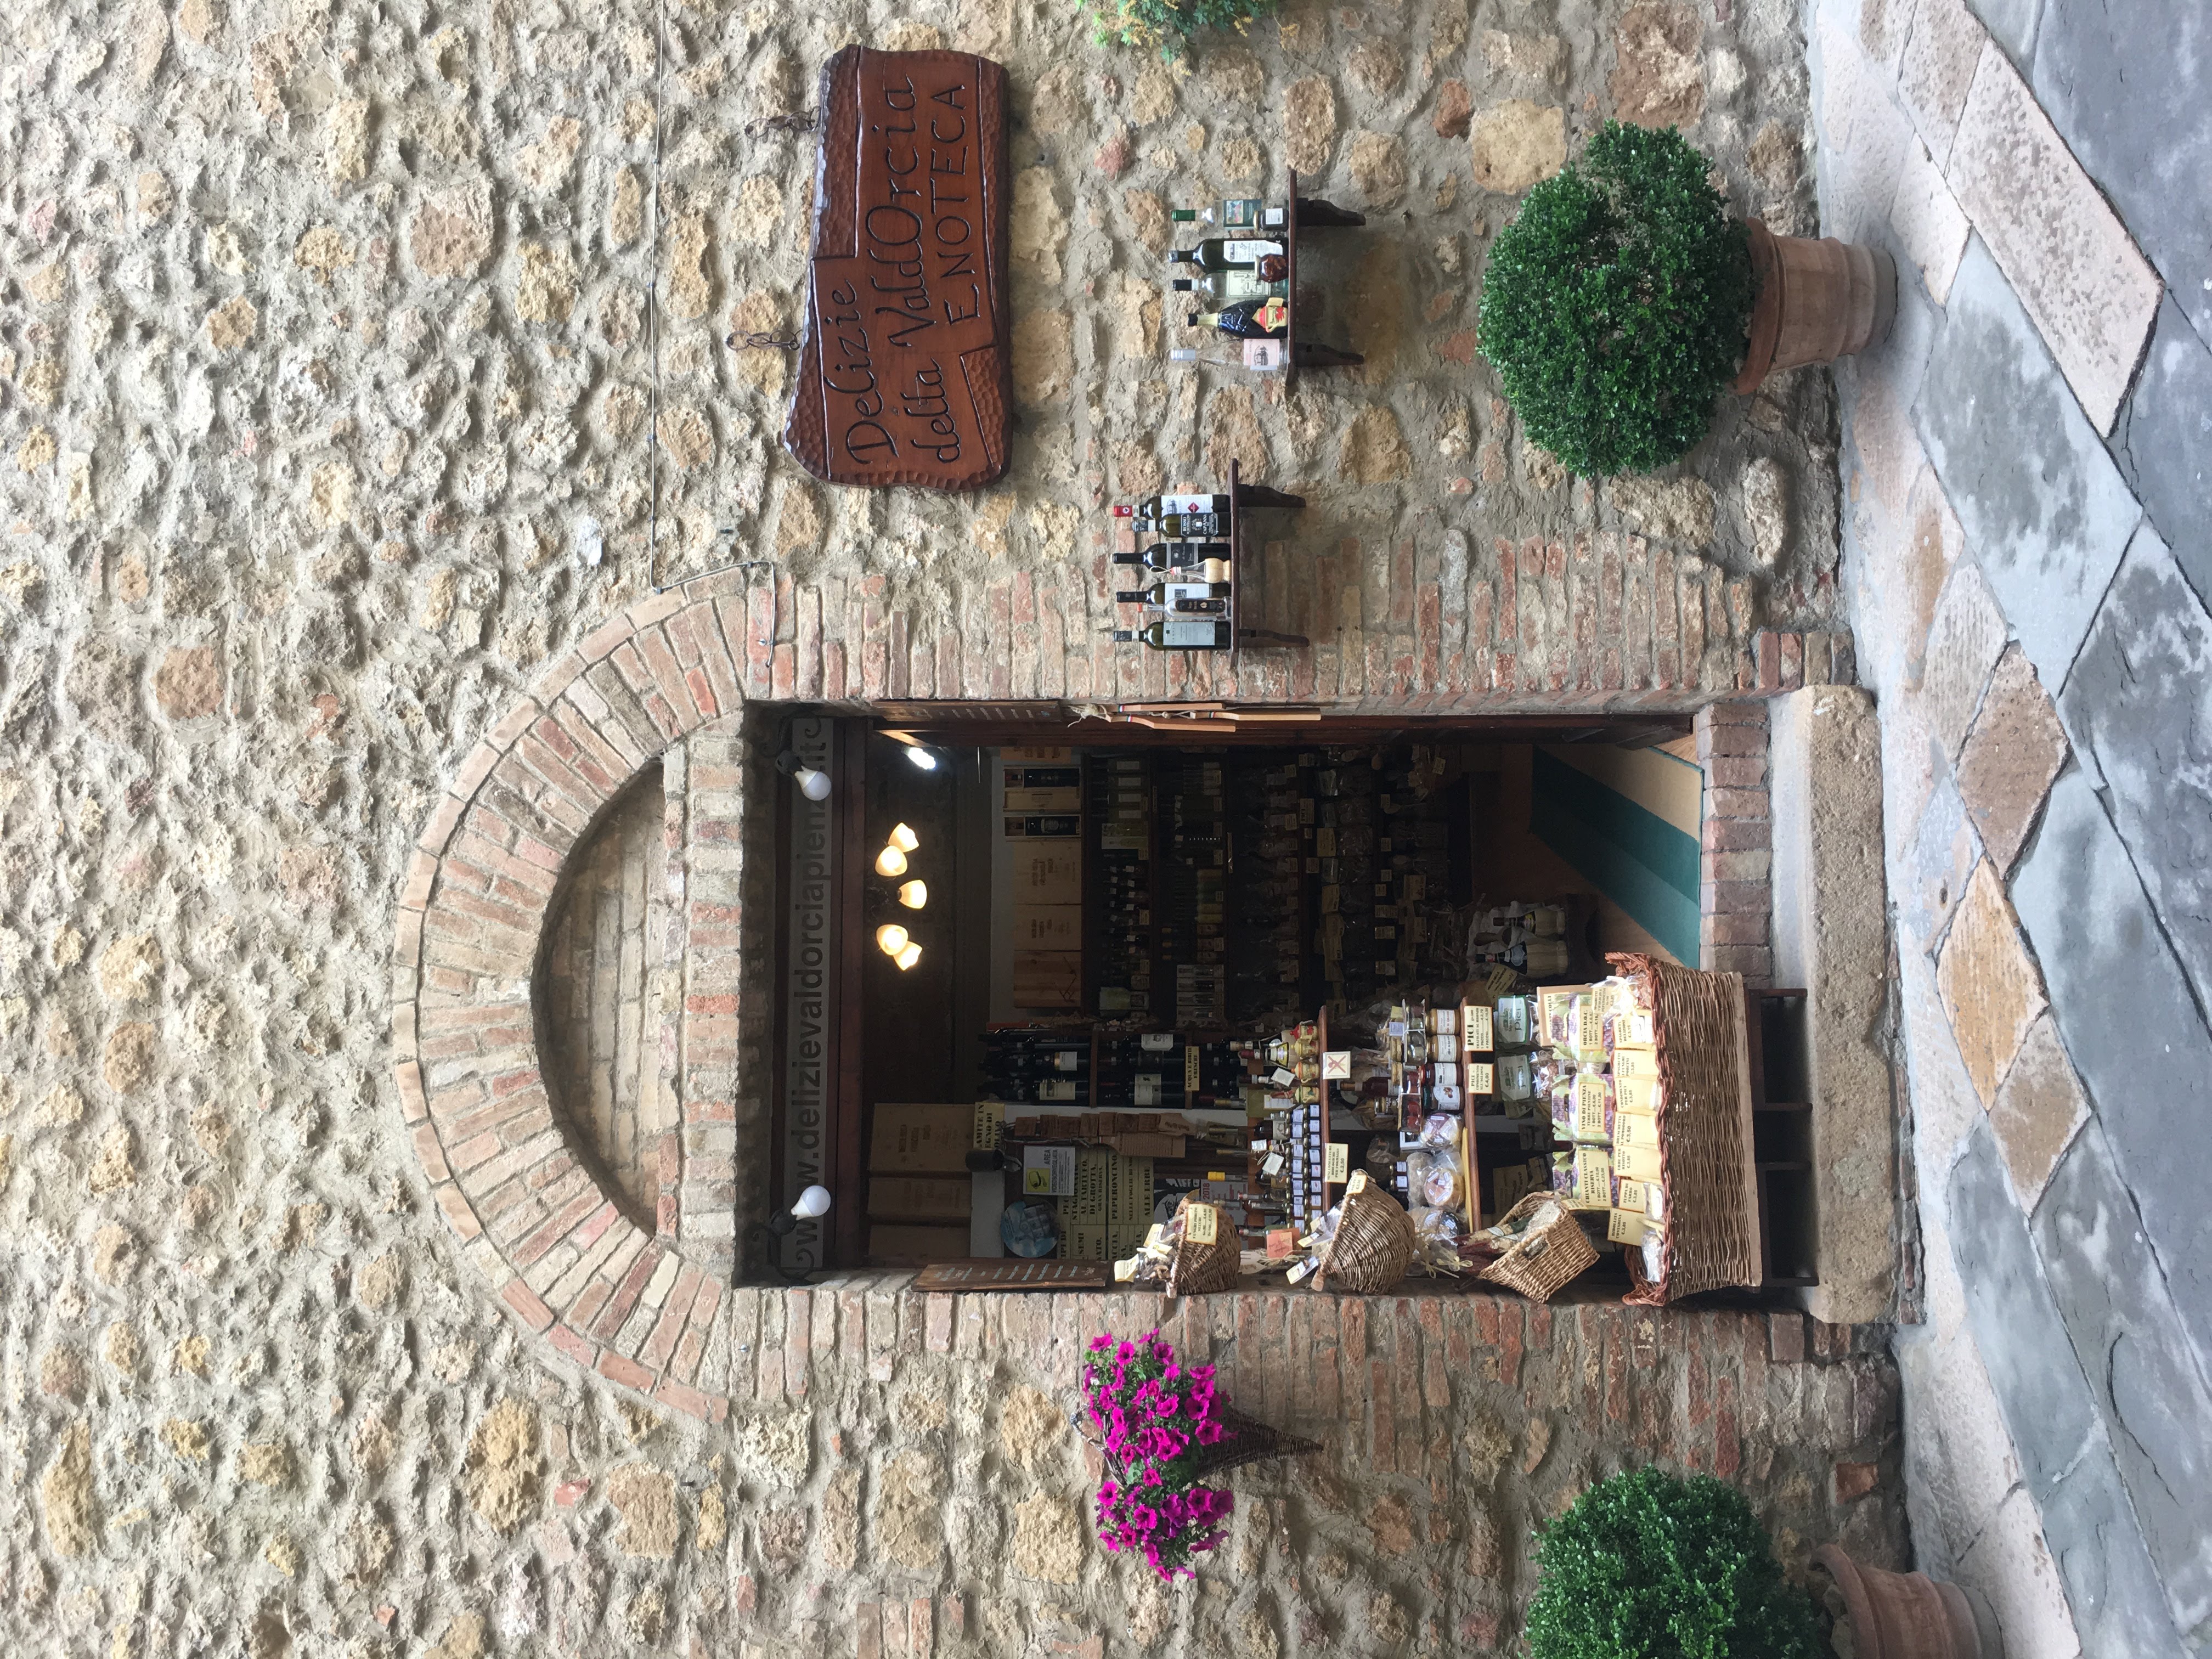 food lovers guide to pienza